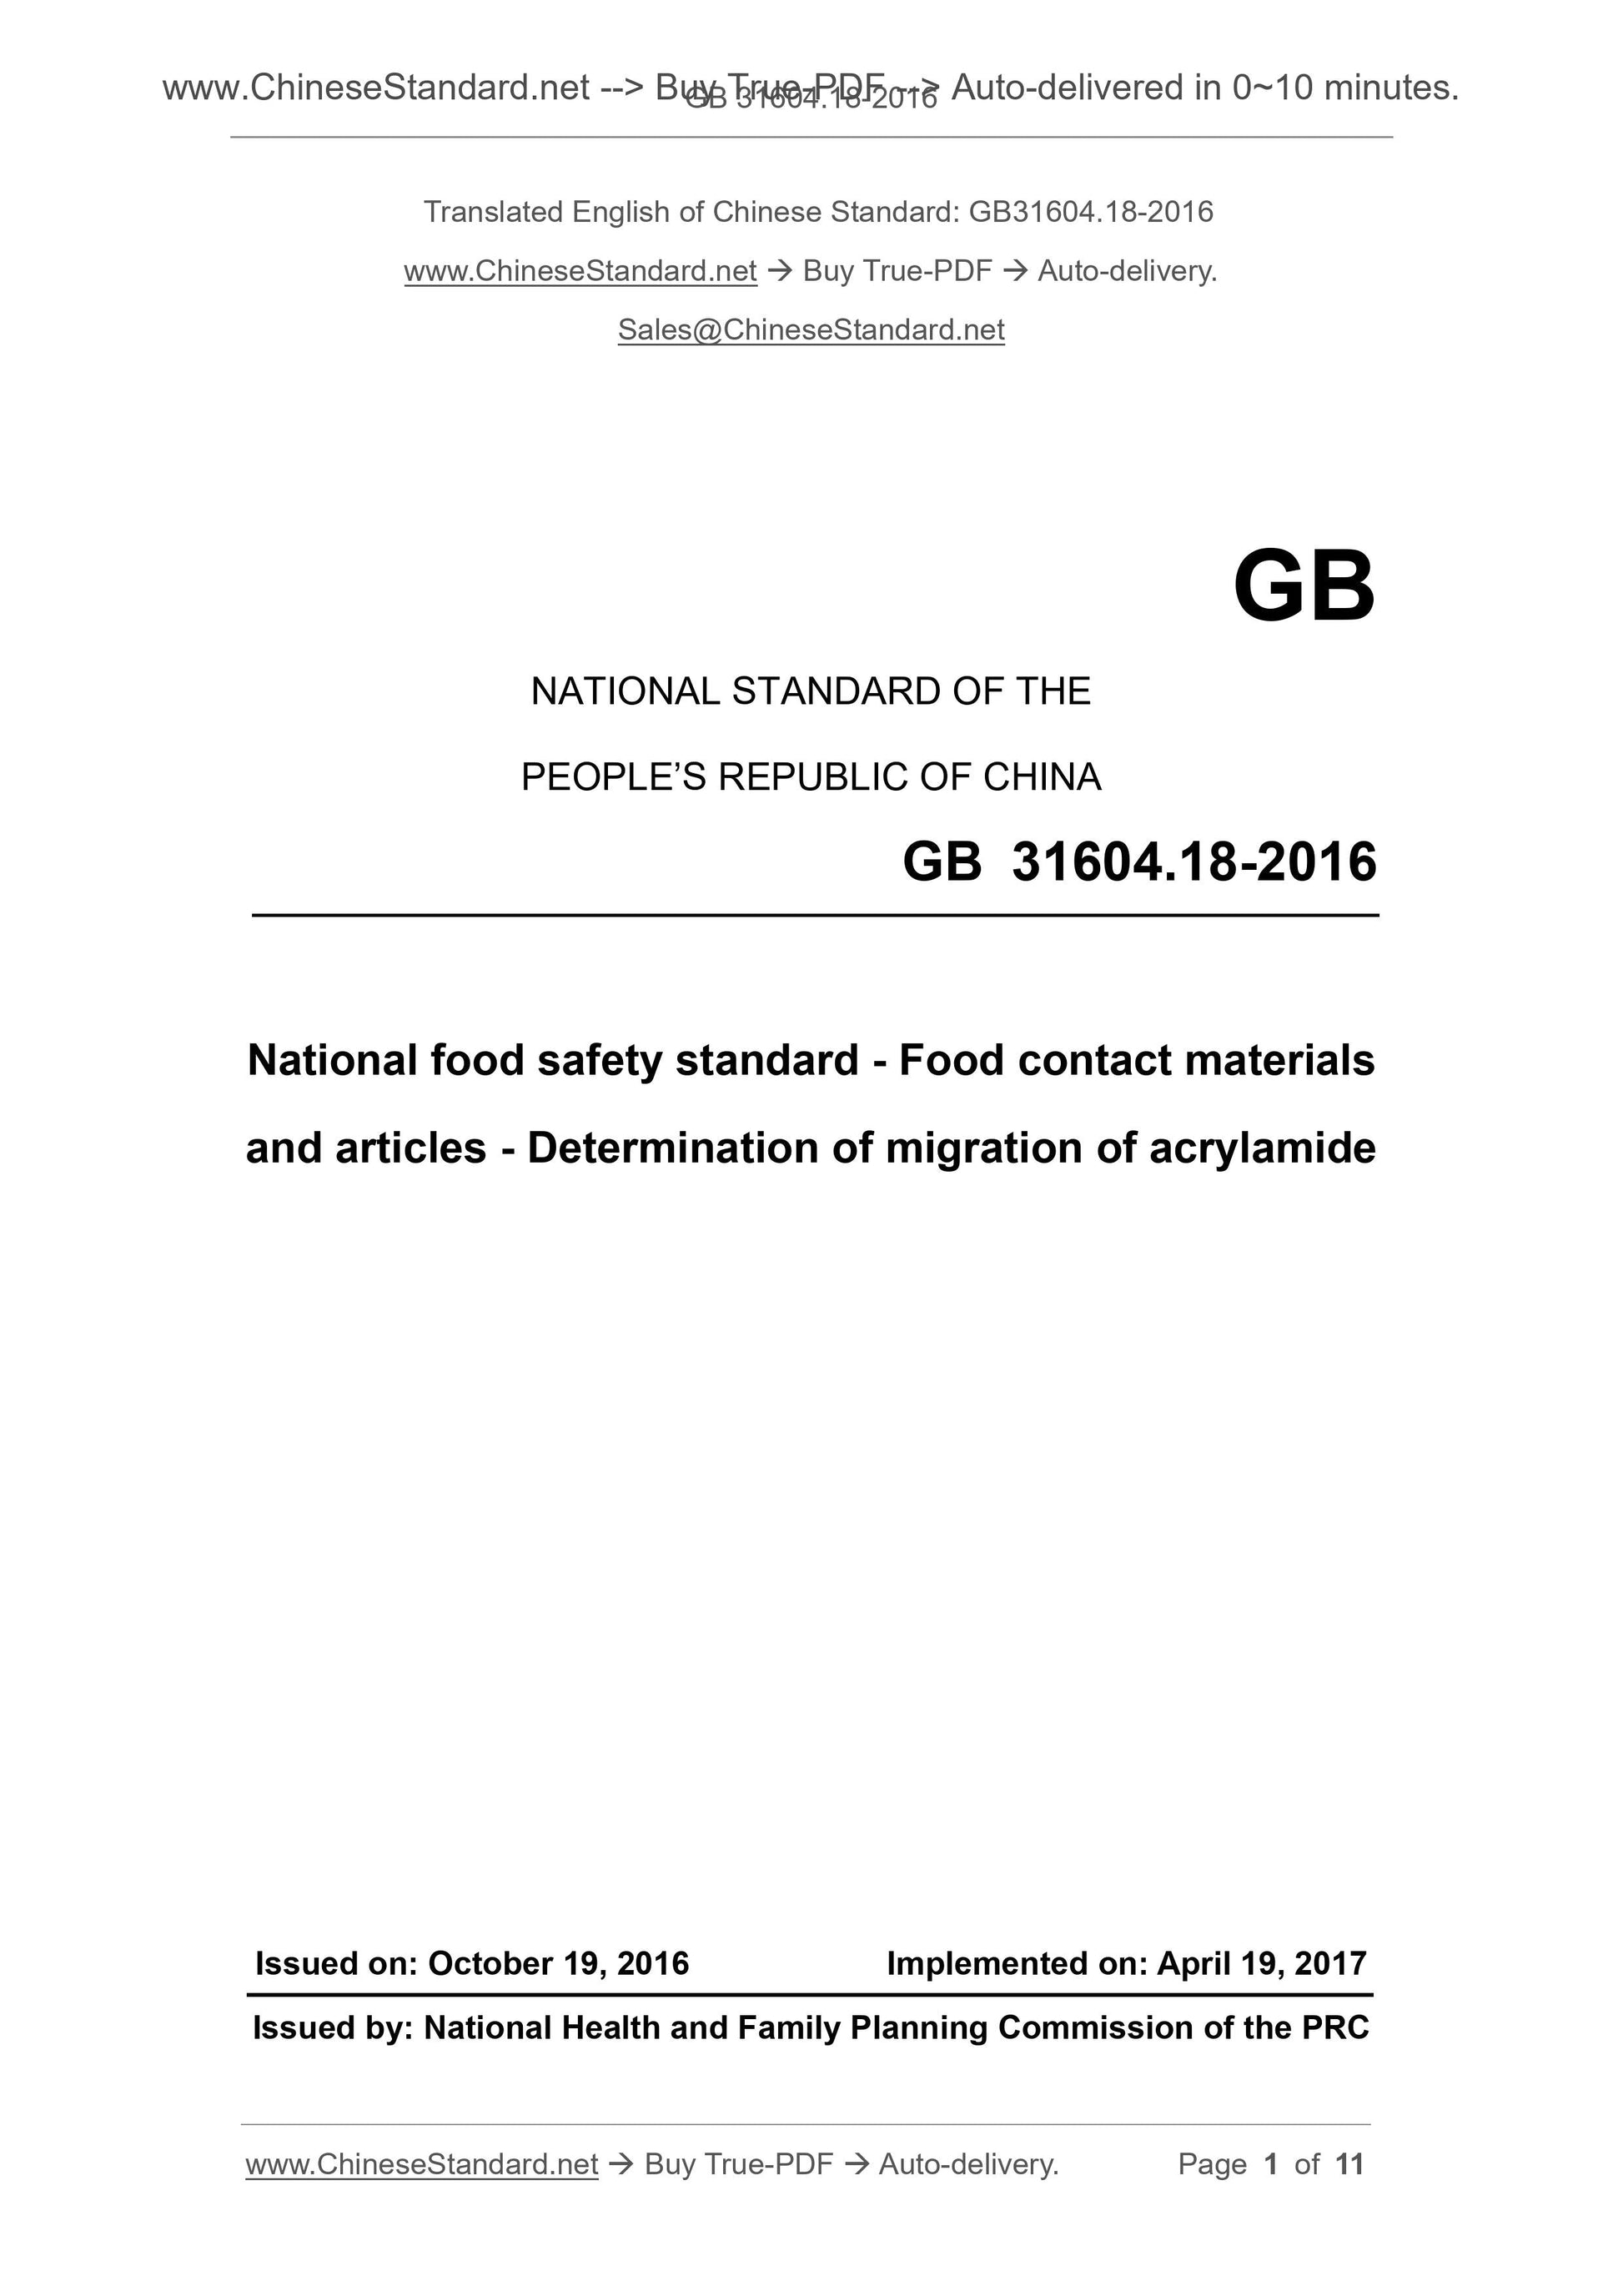 GB 31604.18-2016 Page 1